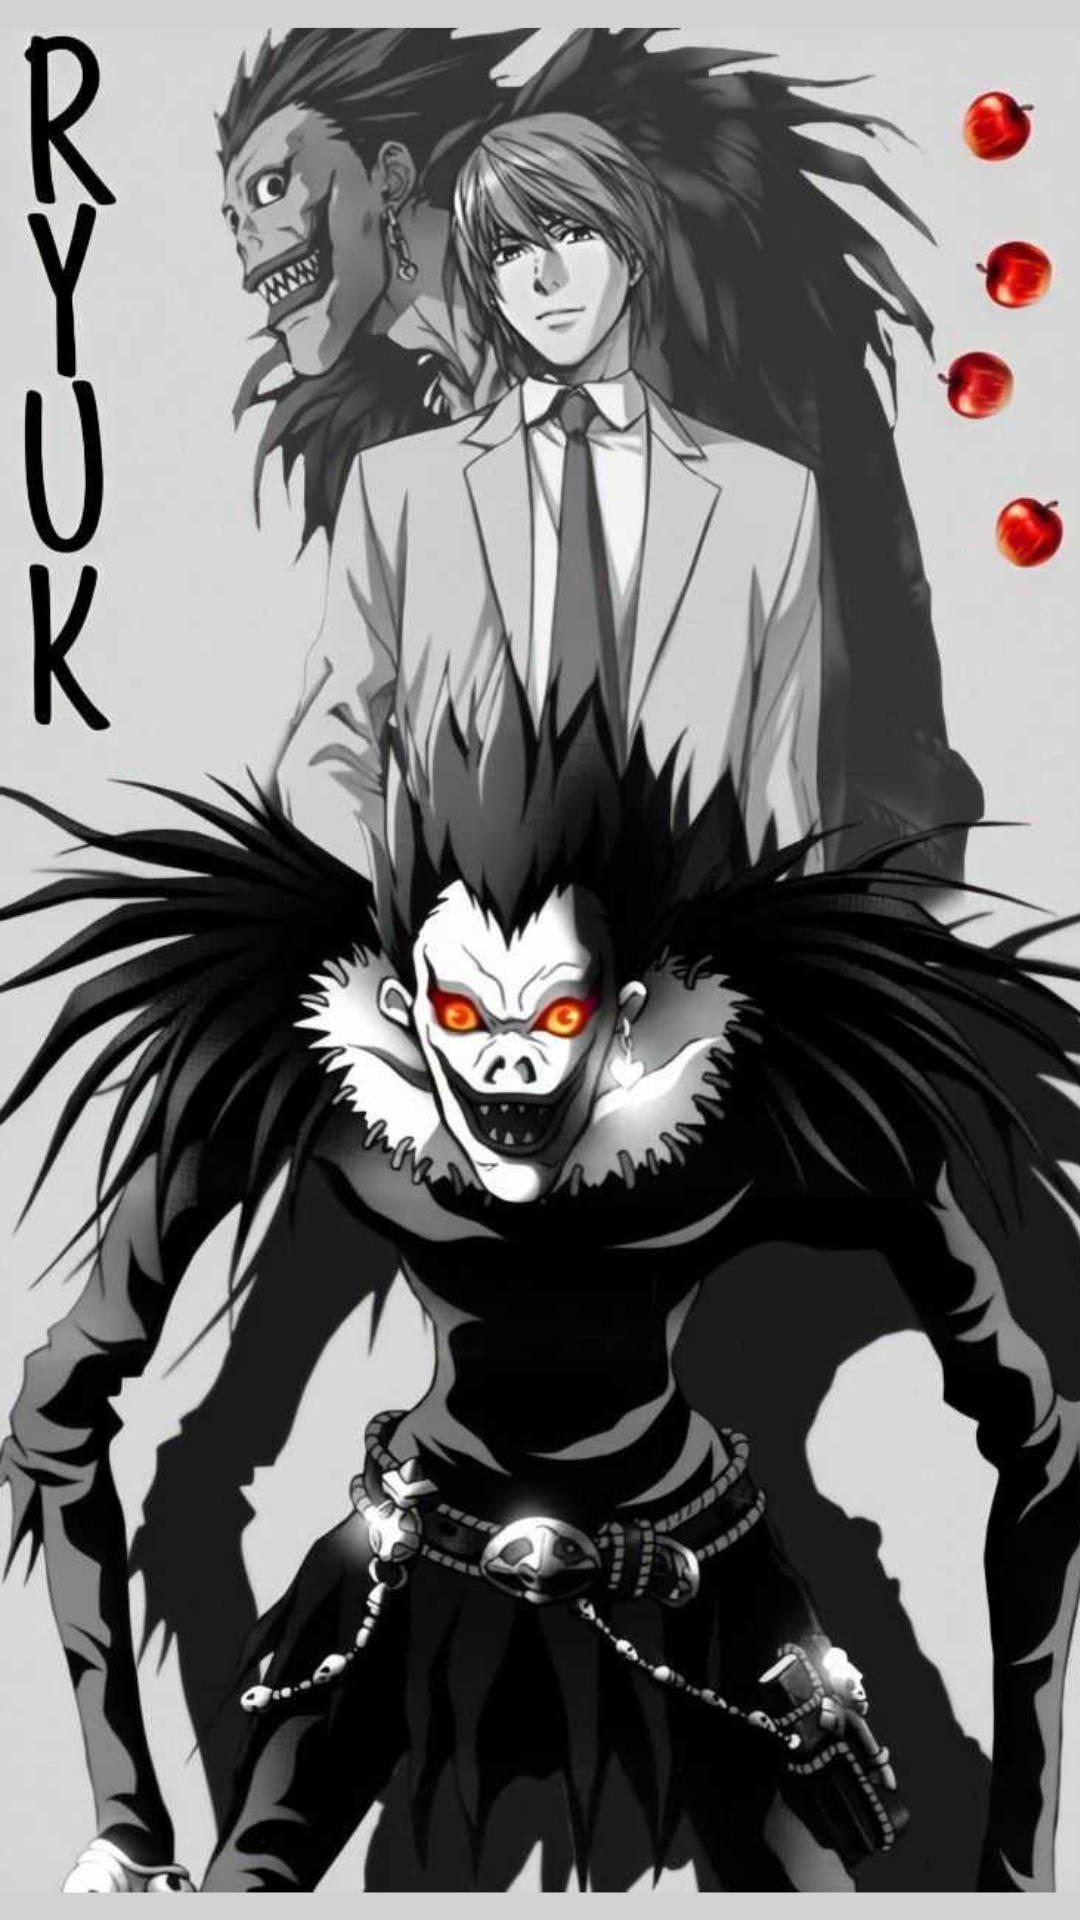 Free Death Note Iphone Wallpaper Downloads, [100+] Death Note Iphone  Wallpapers for FREE 